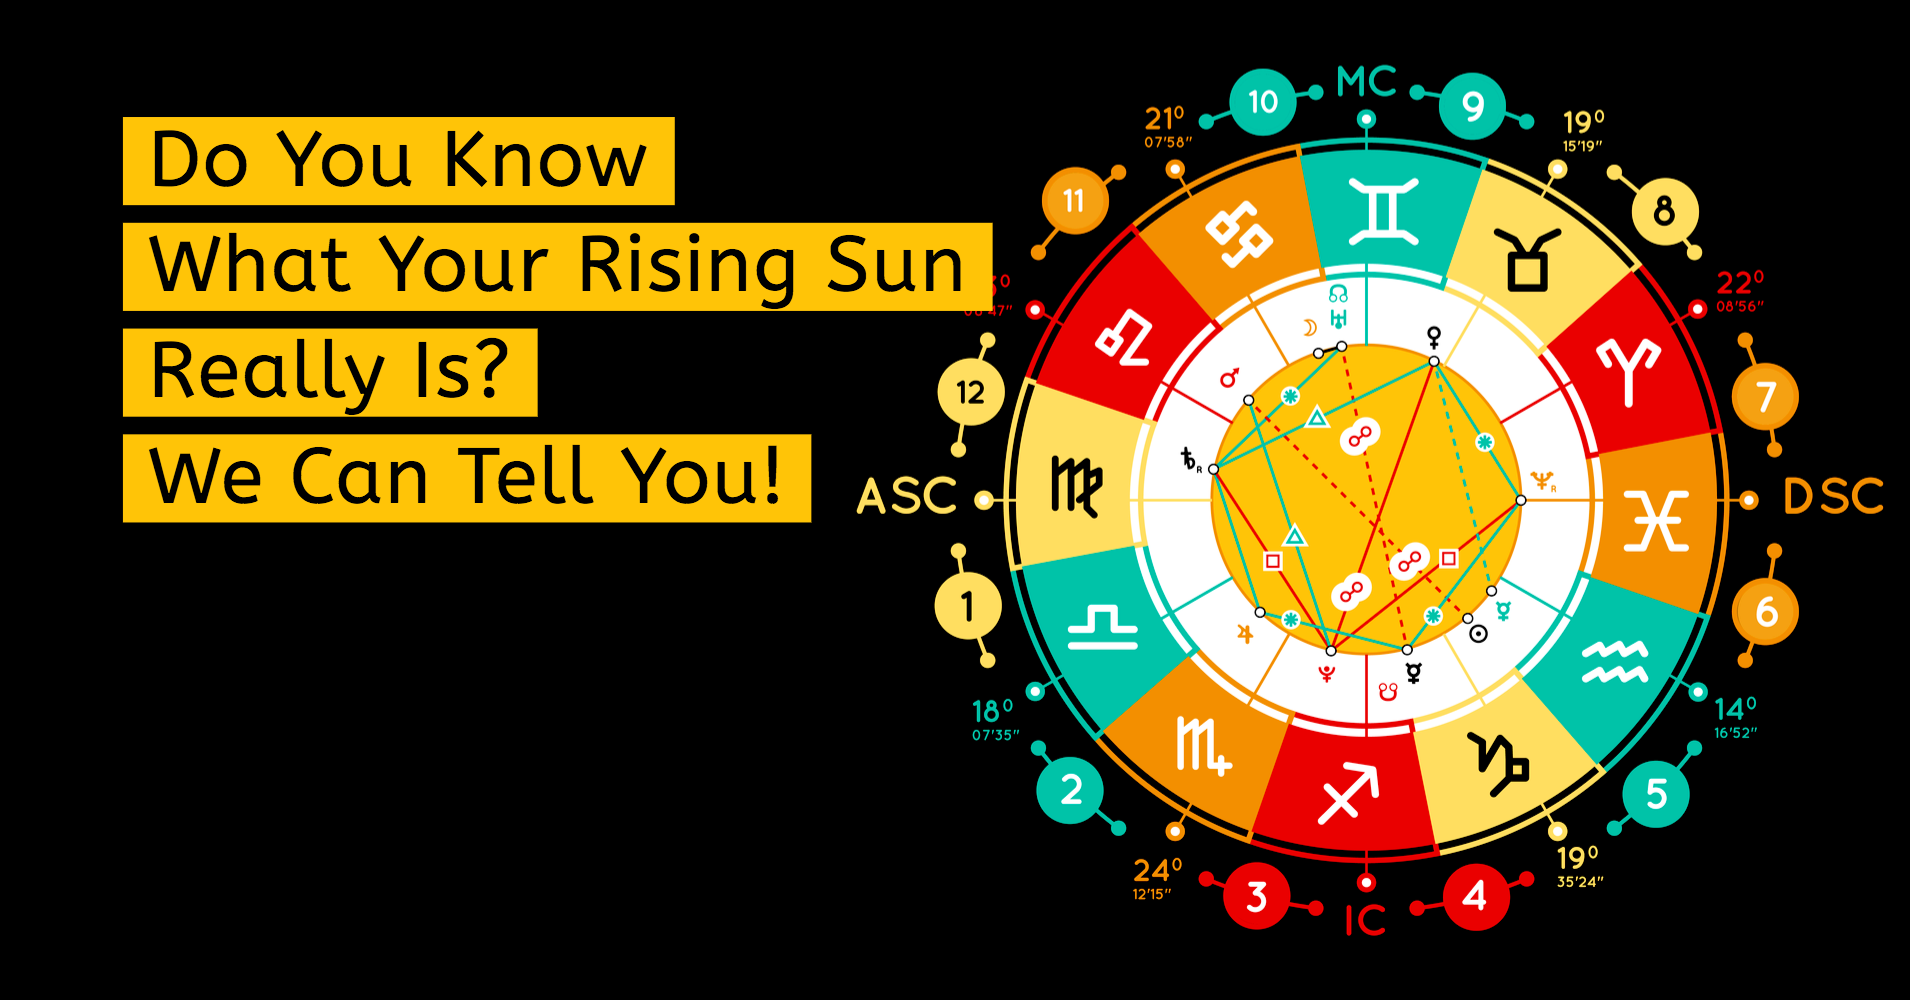 how to find rising sign astrology